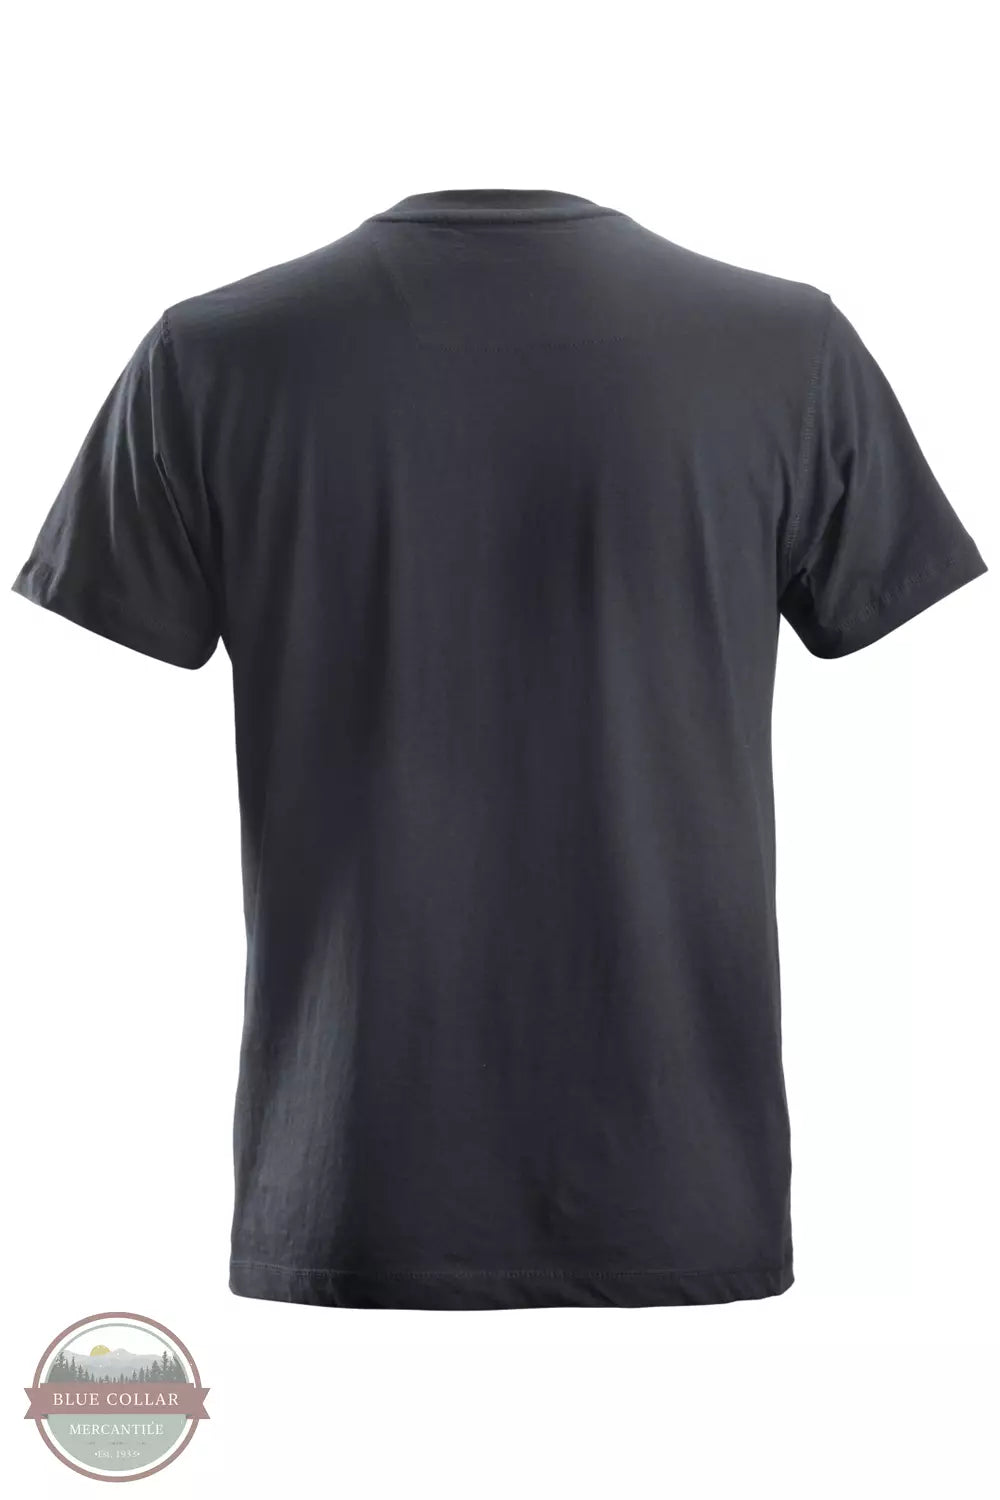 Snicker's Workwear 1361310 Classic Short Sleeve T-Shirt Steel Grey Back View